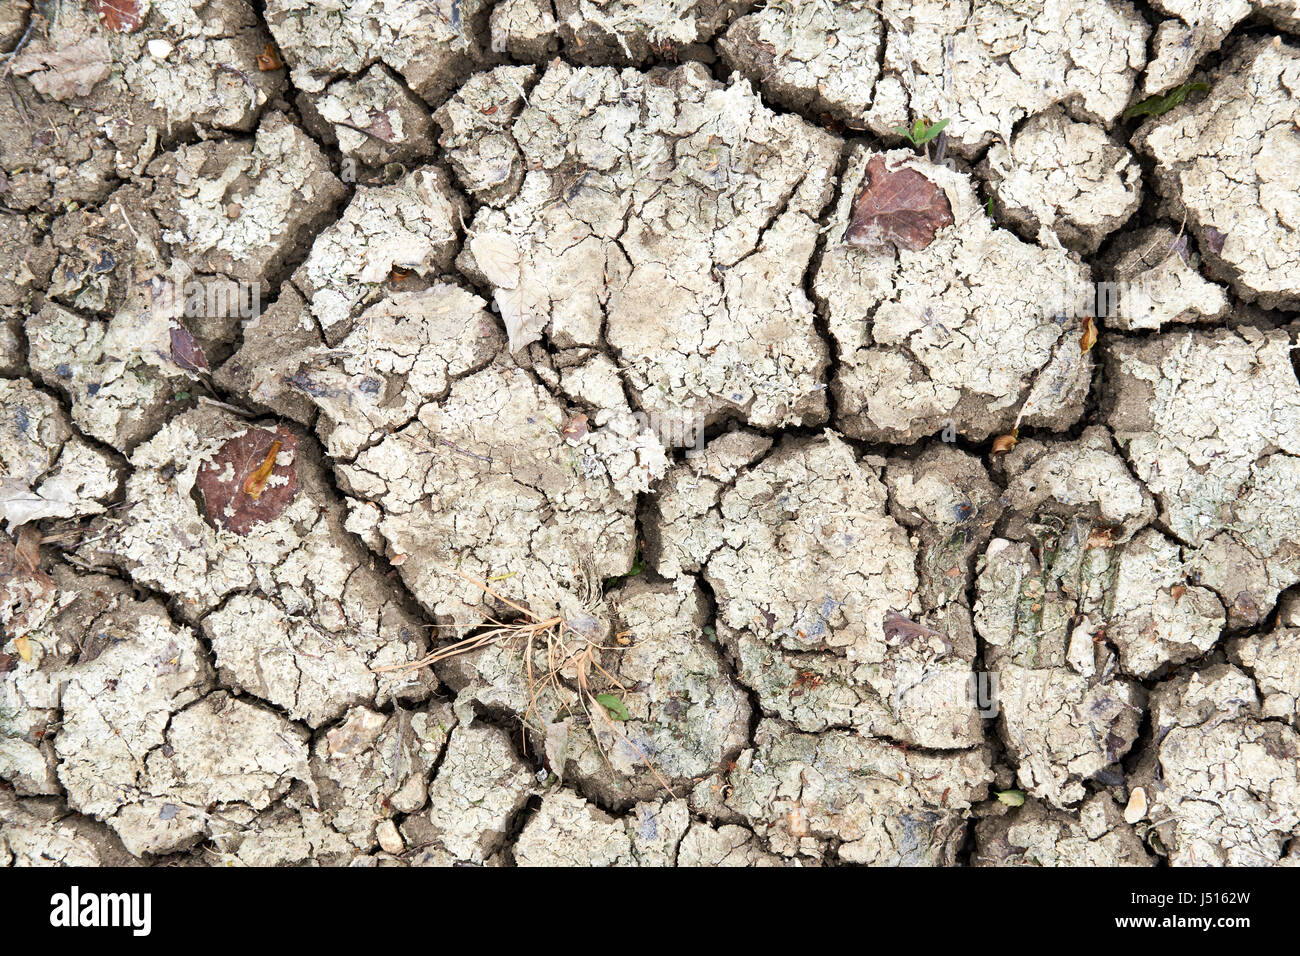 Parched desiccated agricultural soil due to dry climatic conditions, UK. Stock Photo